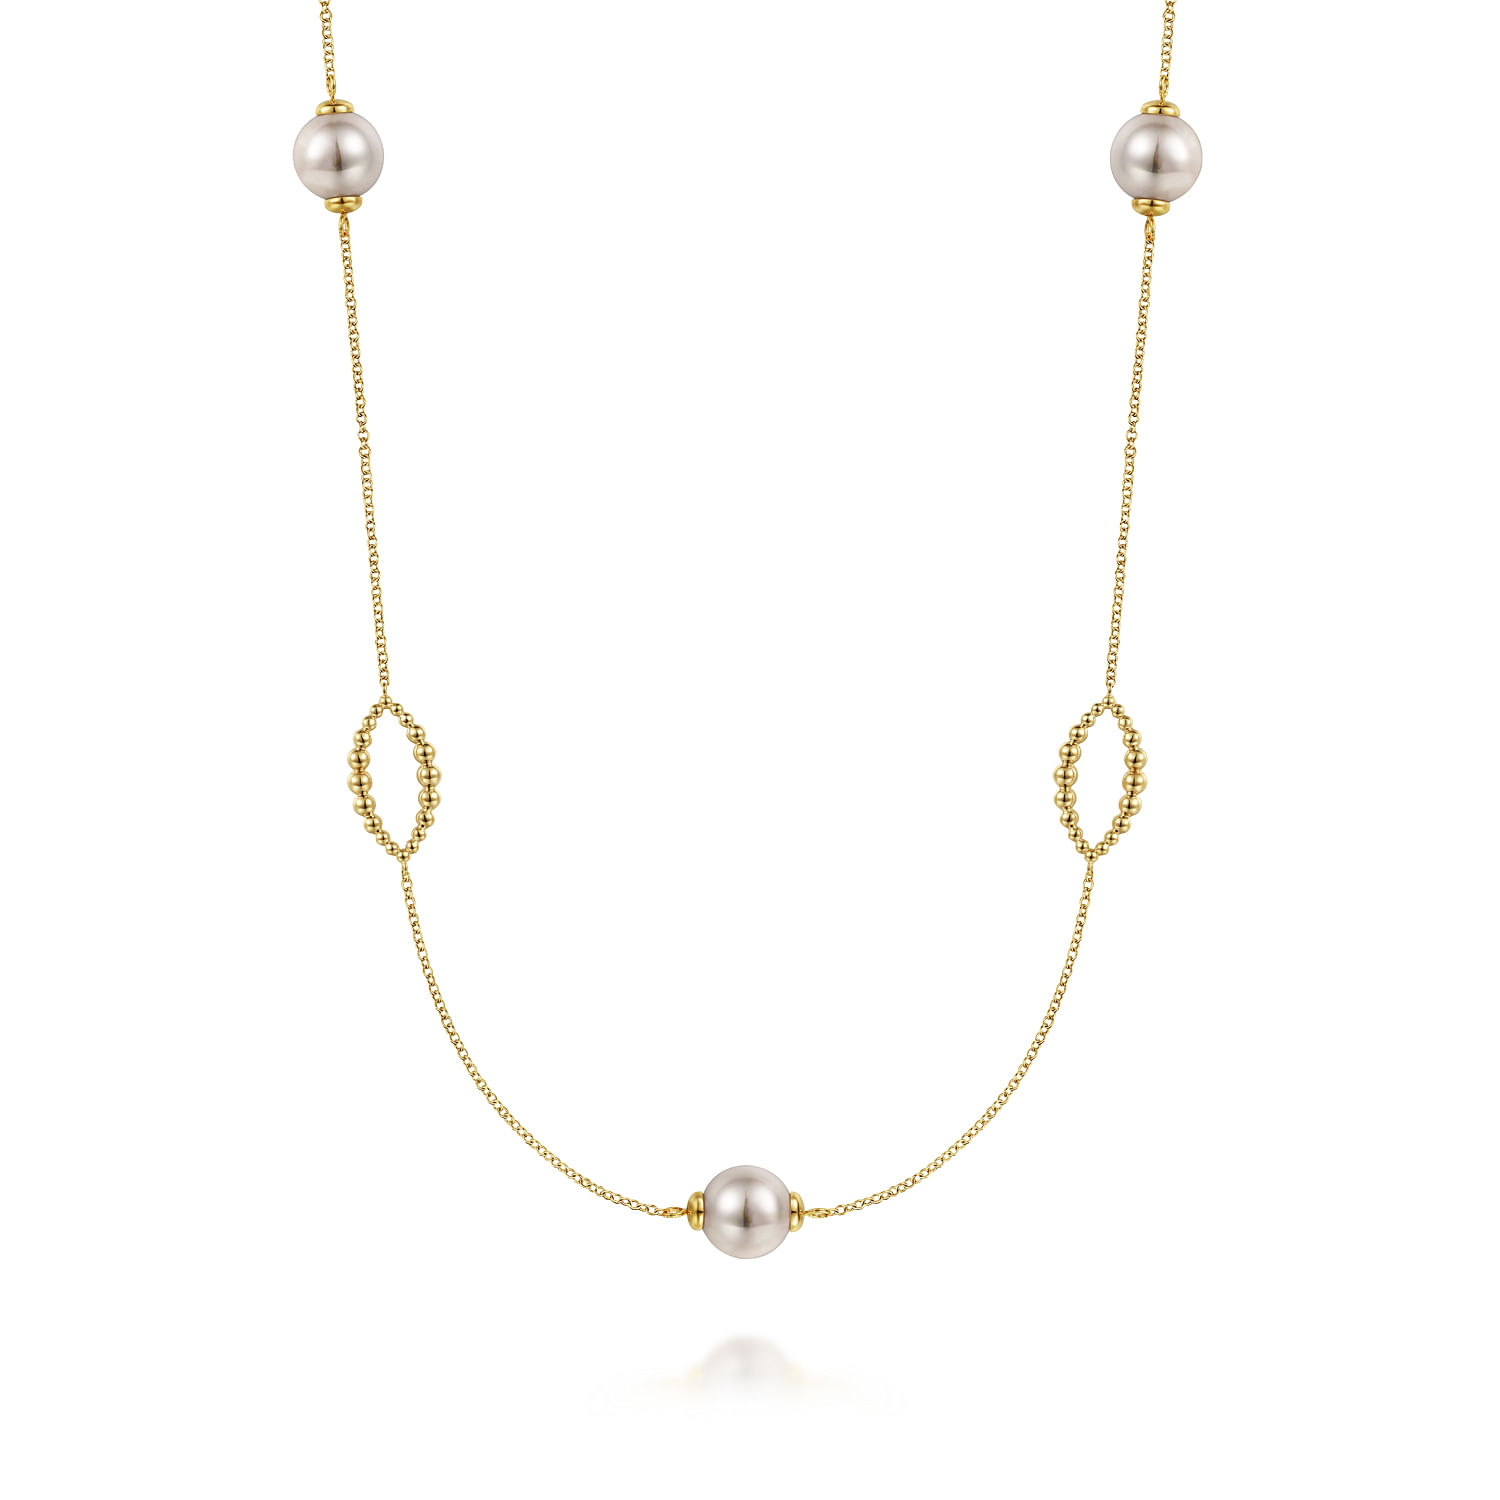 32 Inch 14K Yellow Gold Pearl and Bujukan Ovals Station Necklace